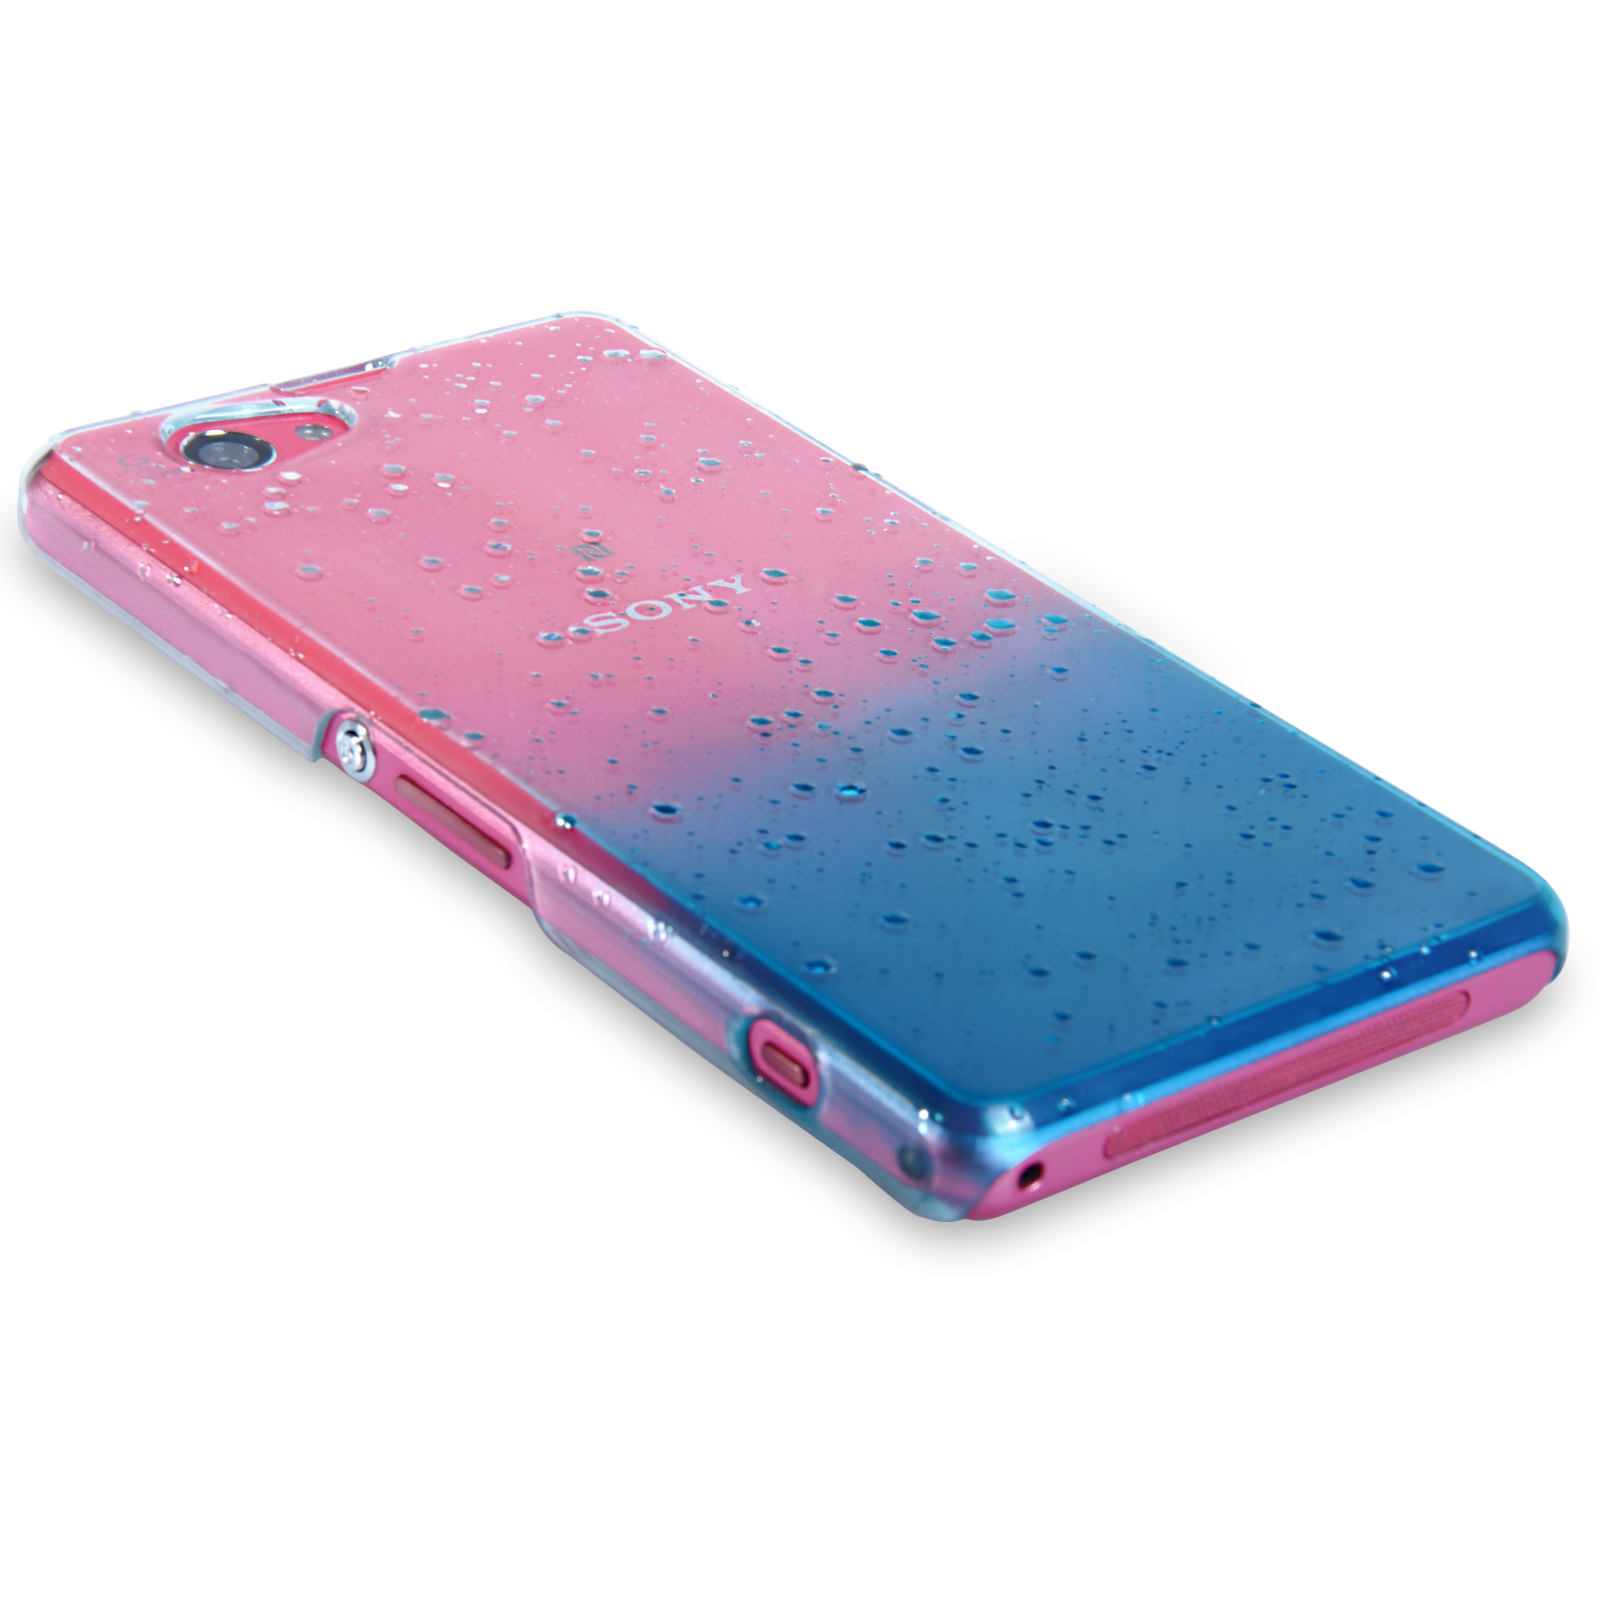 wraak Merg Sociale wetenschappen YouSave Sony Xperia Z1 Compact Case - Blue | Mobile Mad